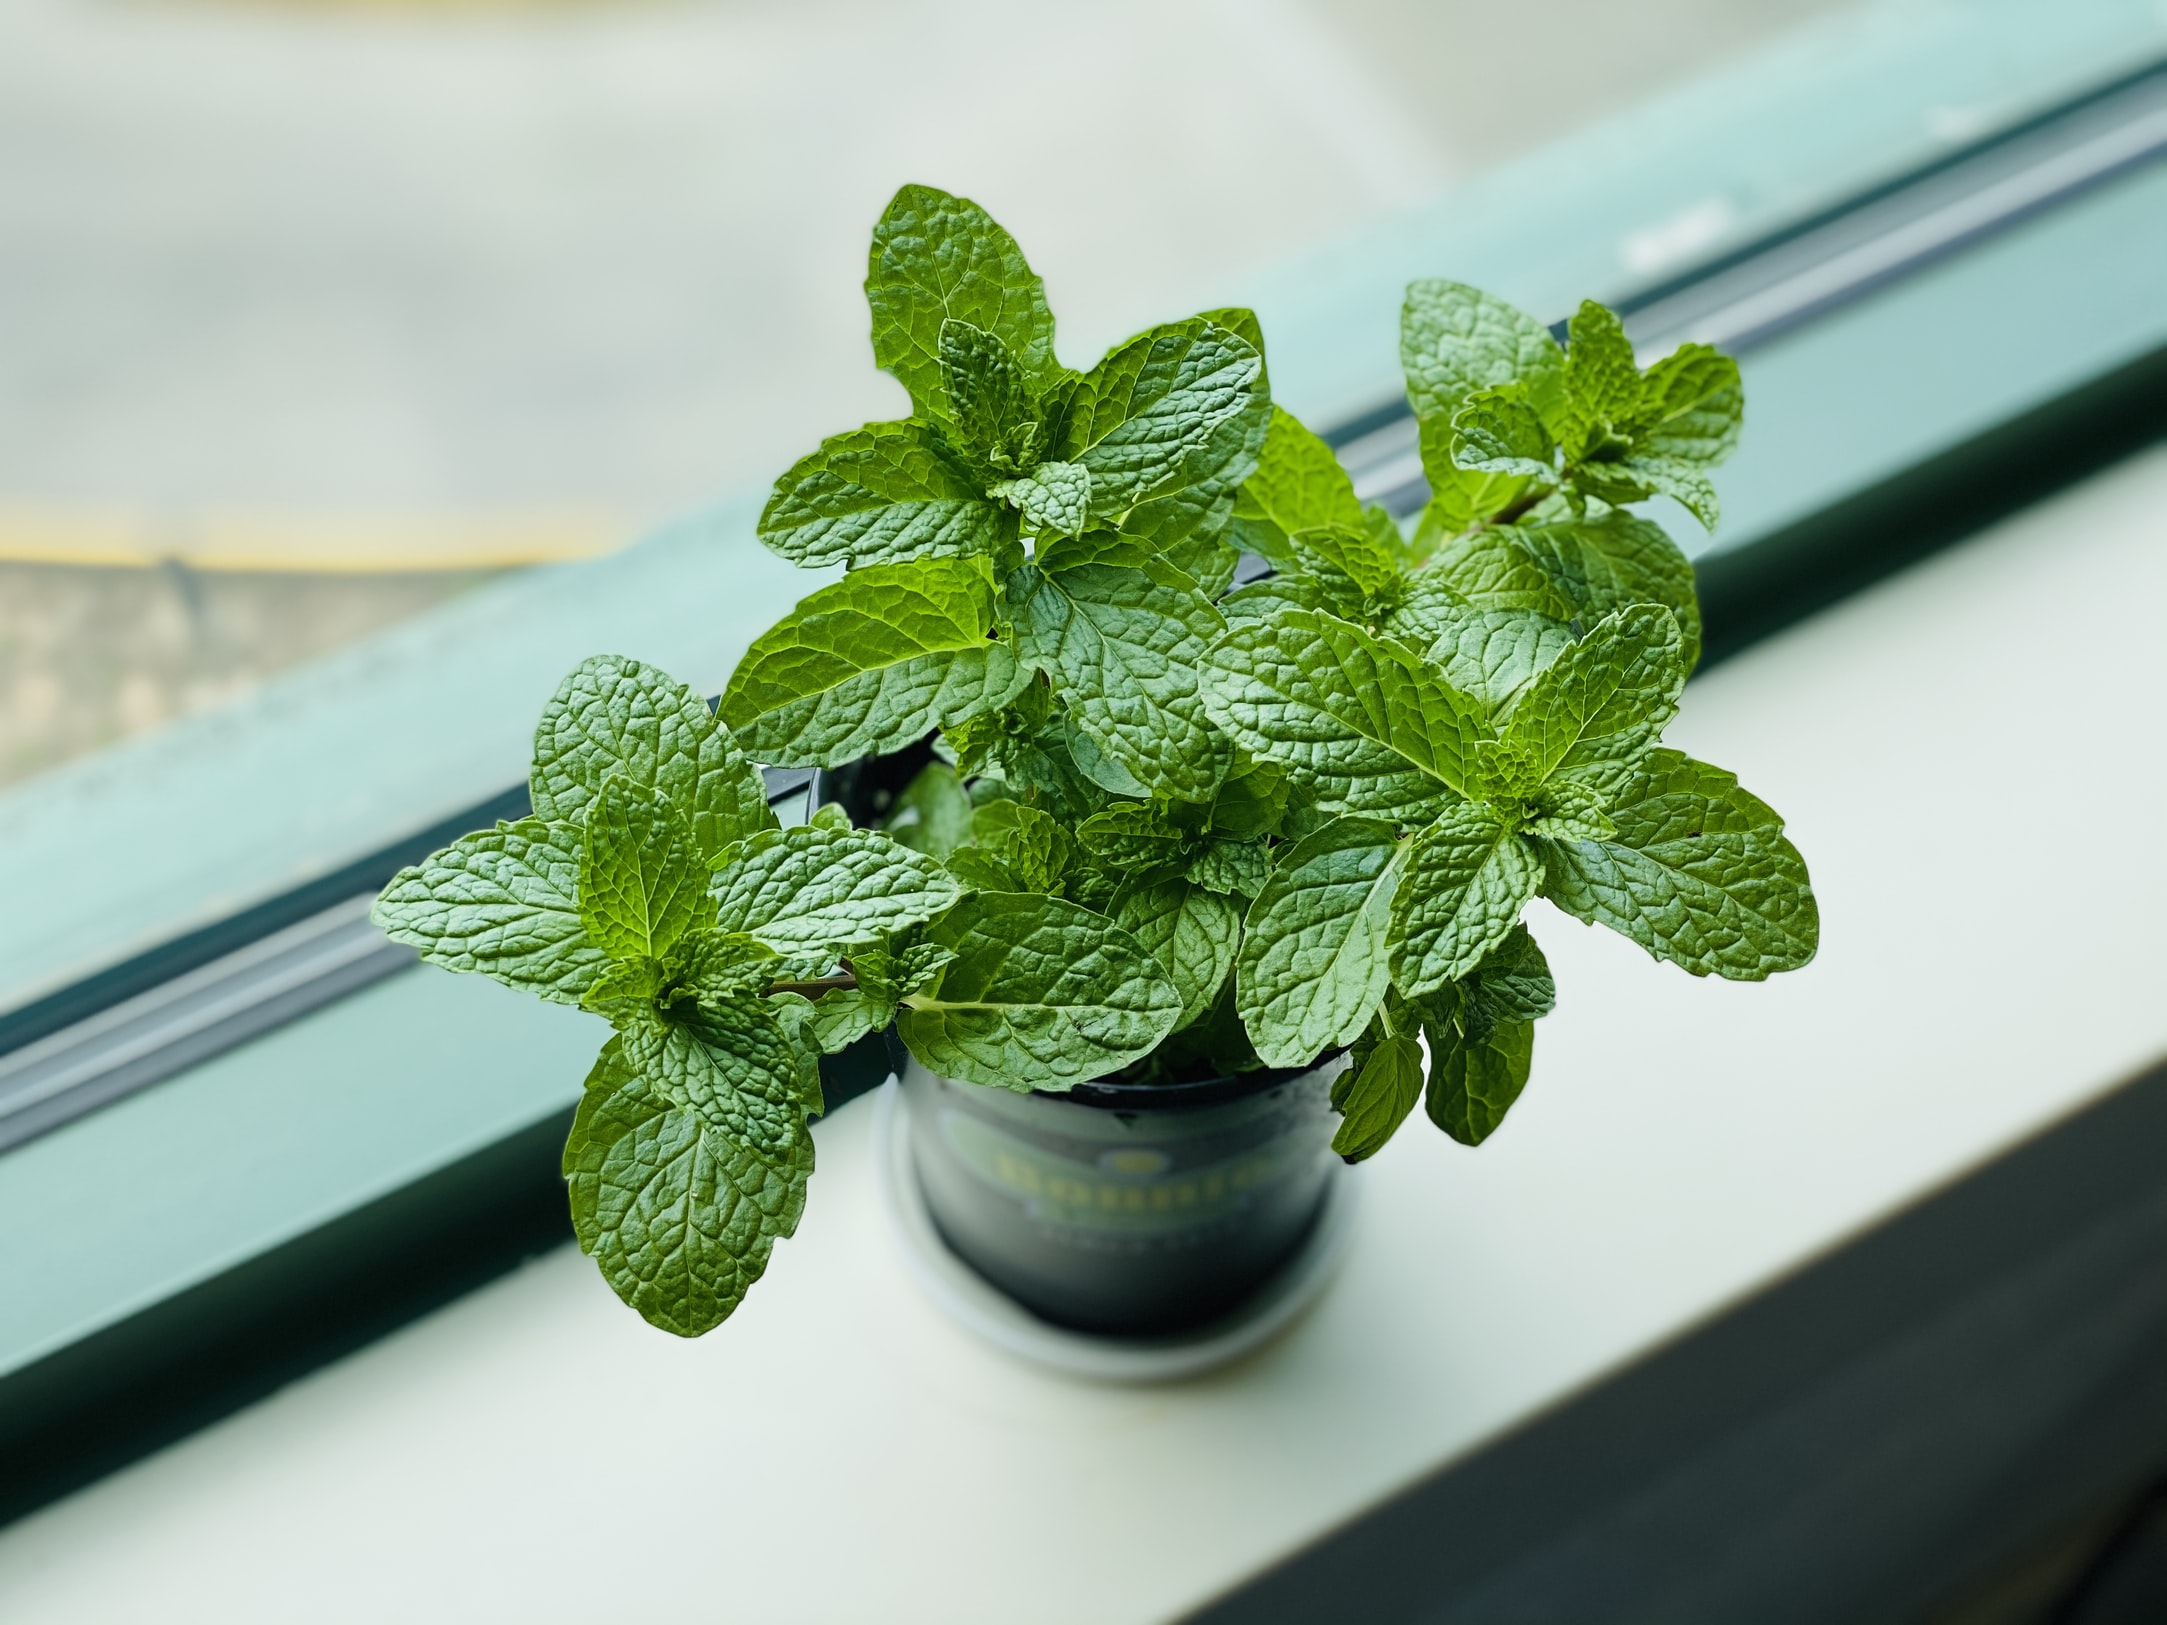 Mint plants can repel spiders, ants, and mosquitoes. But be careful when you plant mint because these plants spread rapidly!